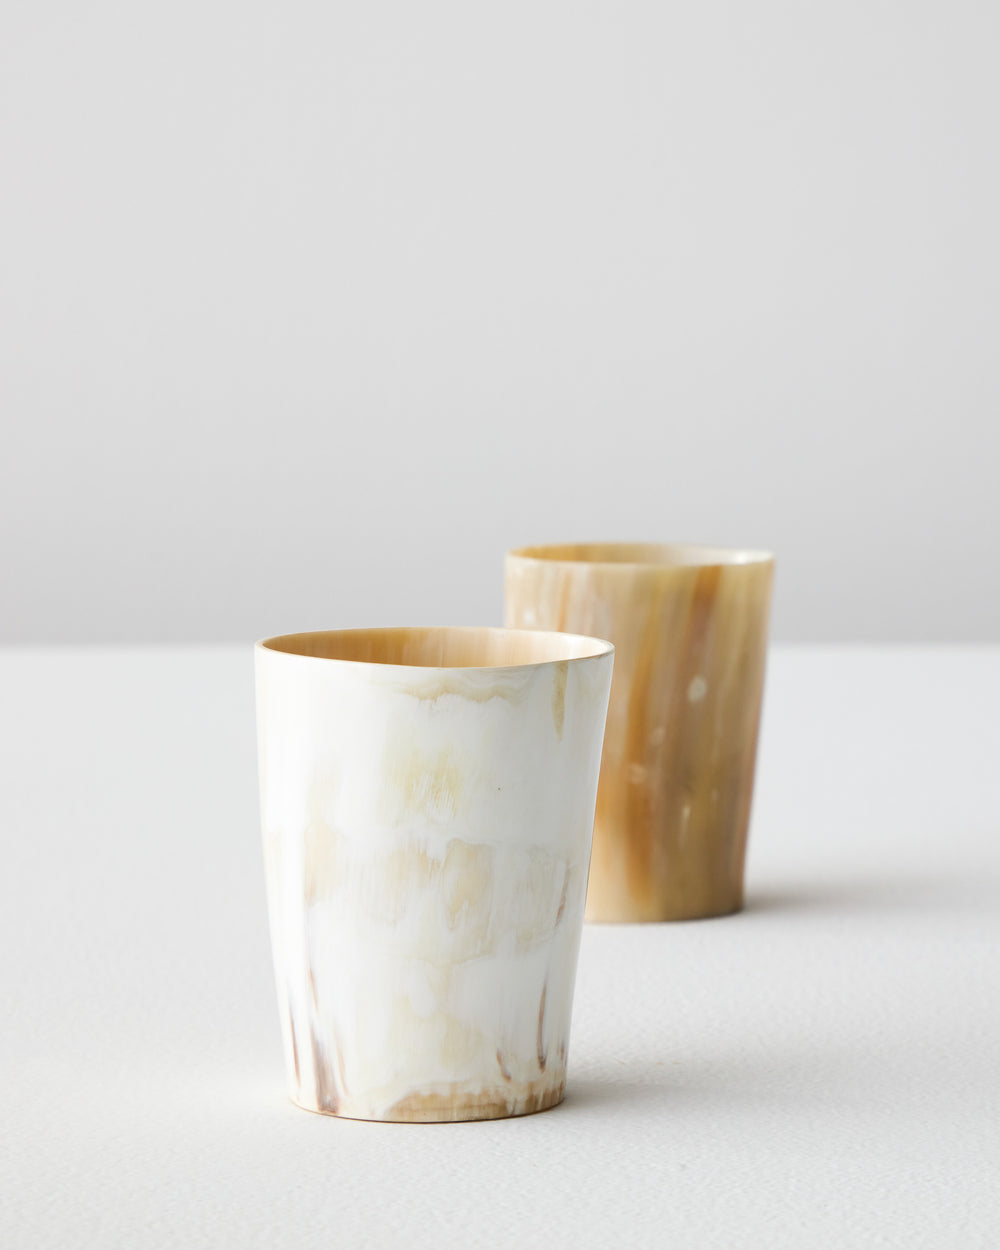 Luxury Fairkind tumblers and home shelf decor ethically sourced in Uganda. Handmade with unique recycled horn material.